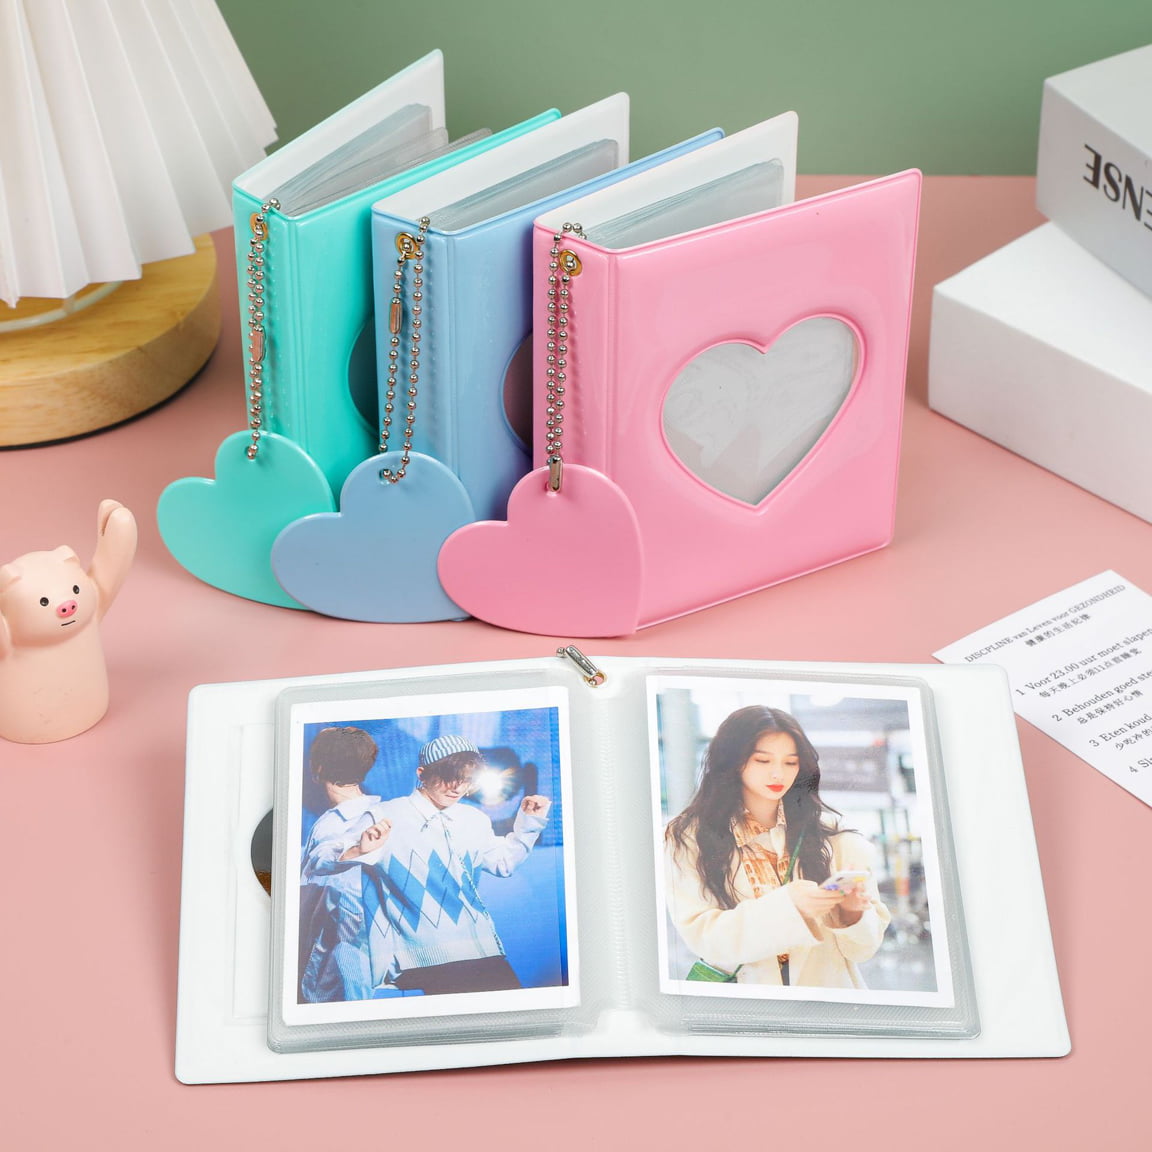 Kpop Photocard Holder Book - Mini Photo Album with Mirror-like Cover -  Photocard Binder for Small Photos - 32 Pockets - Pink 